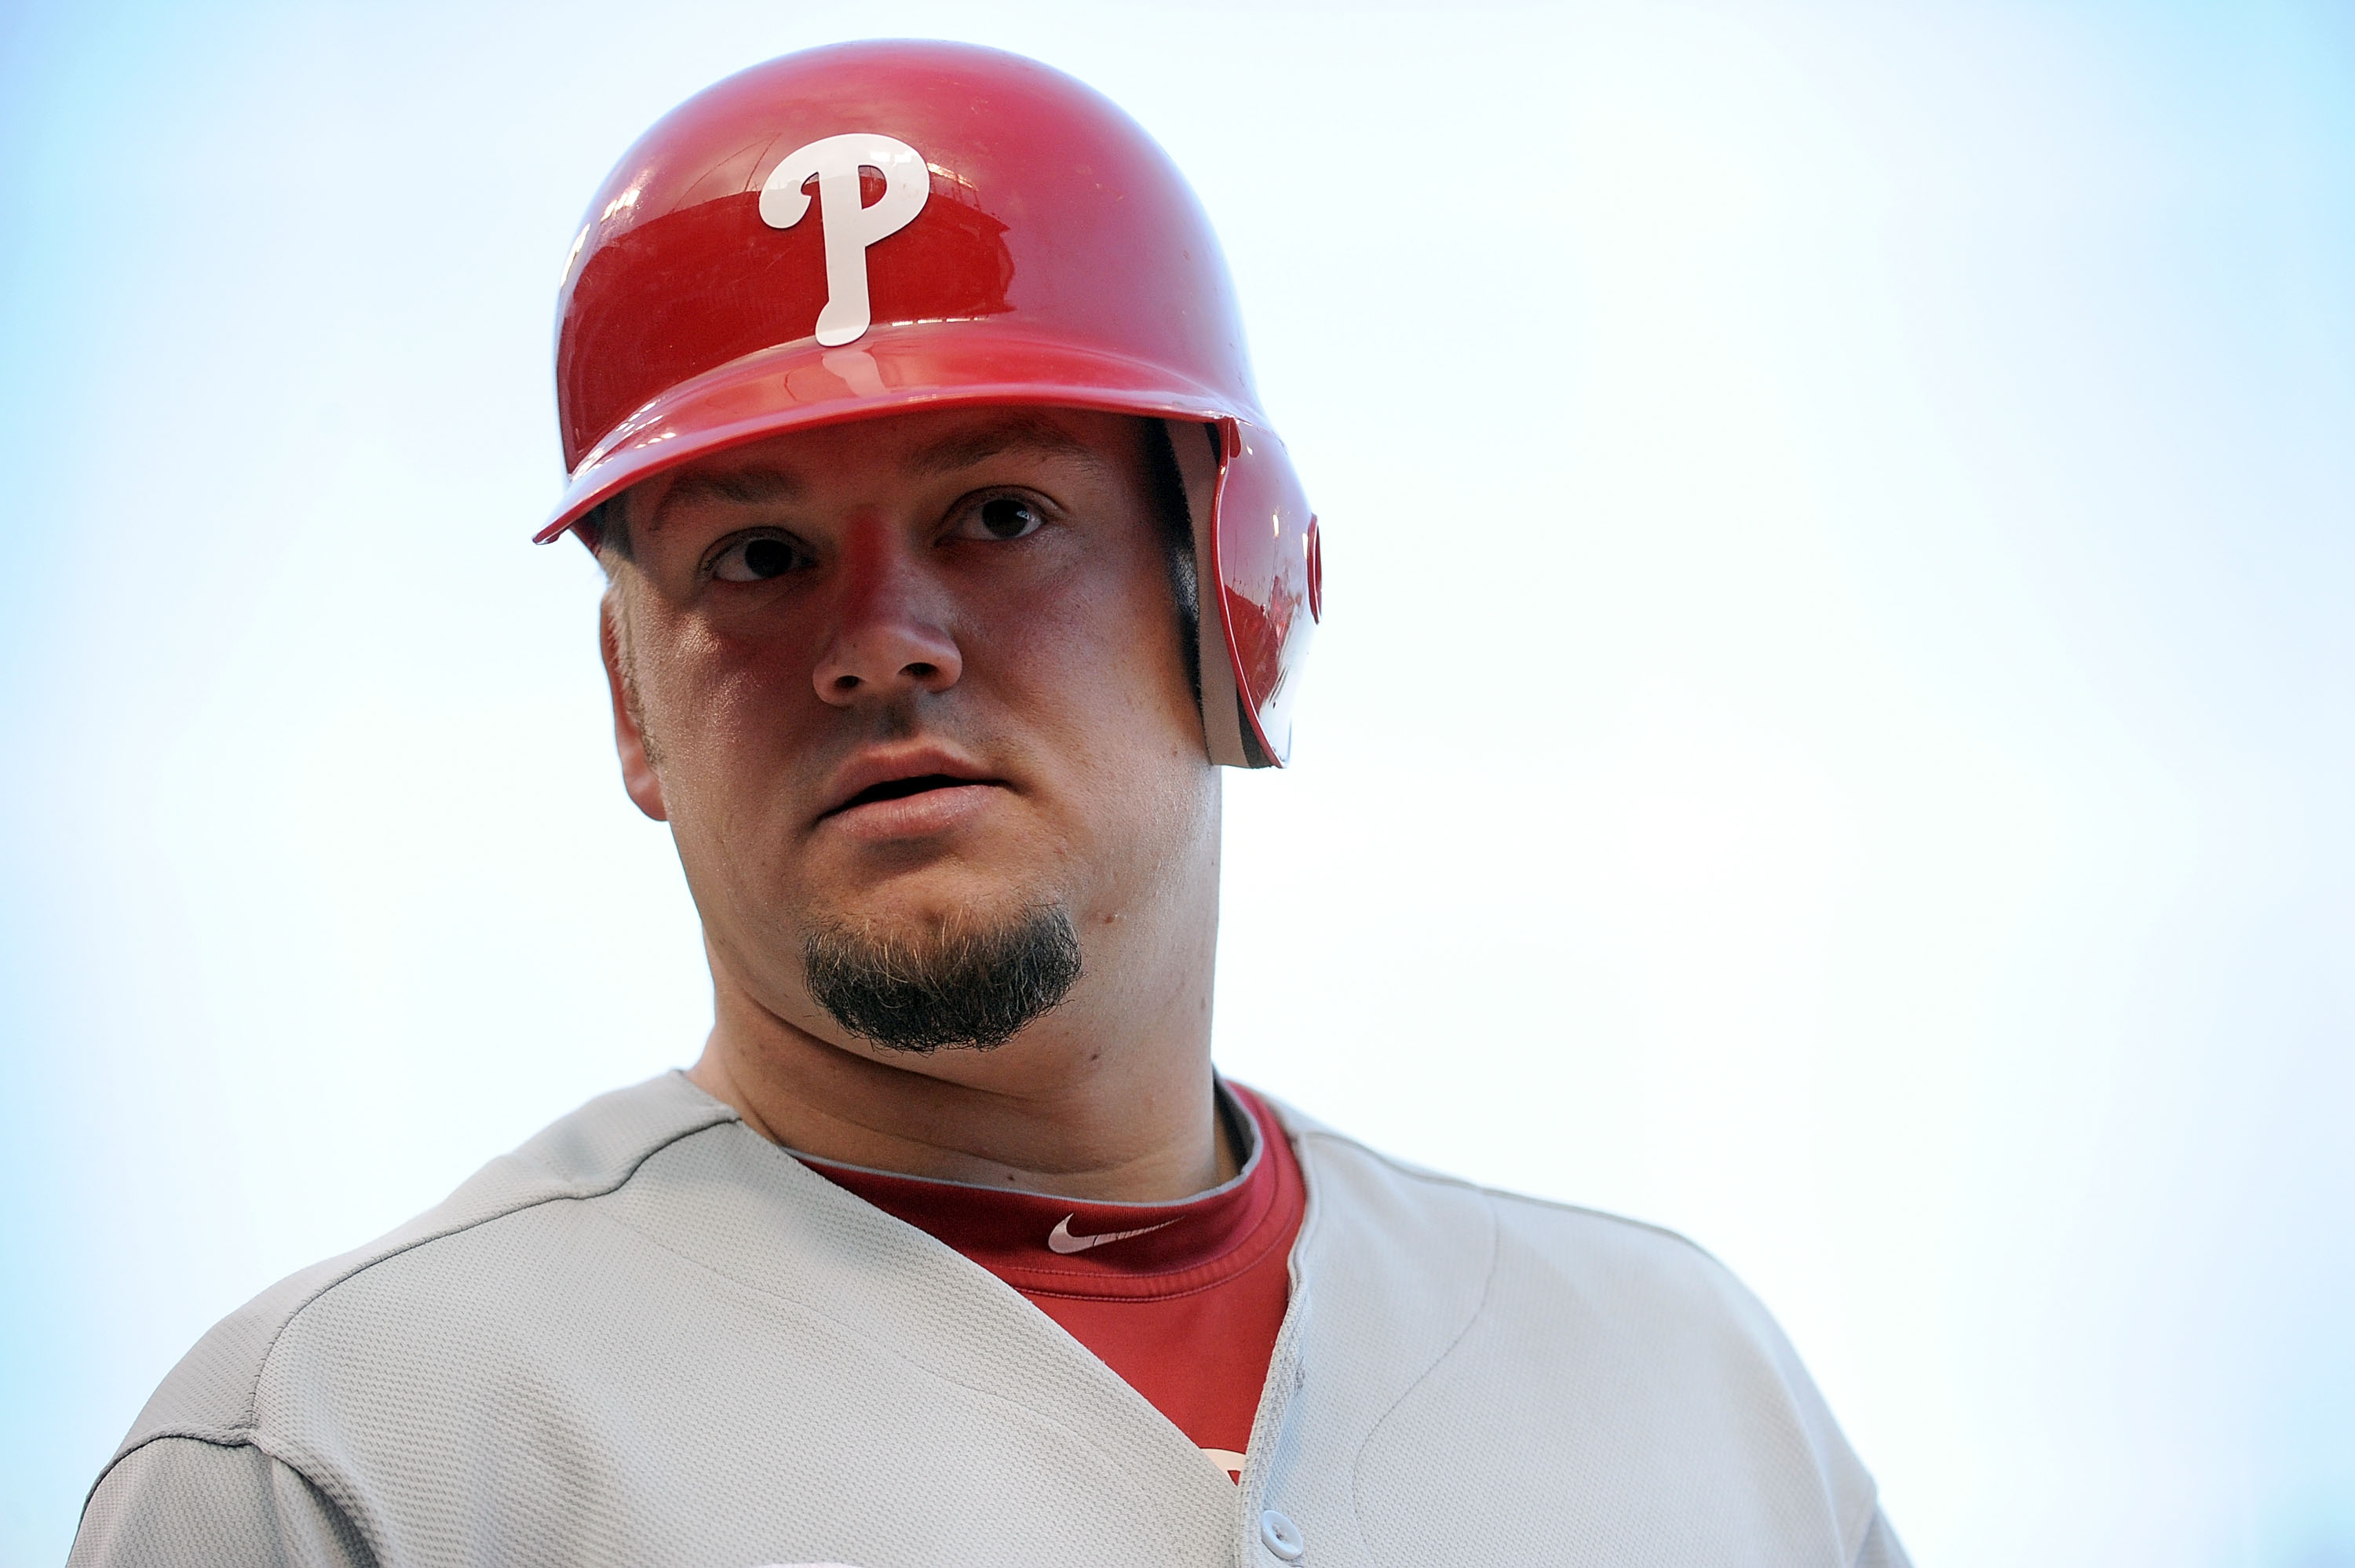 Phillies' Blanton better, but Phils get Figueroa in case – Delco Times